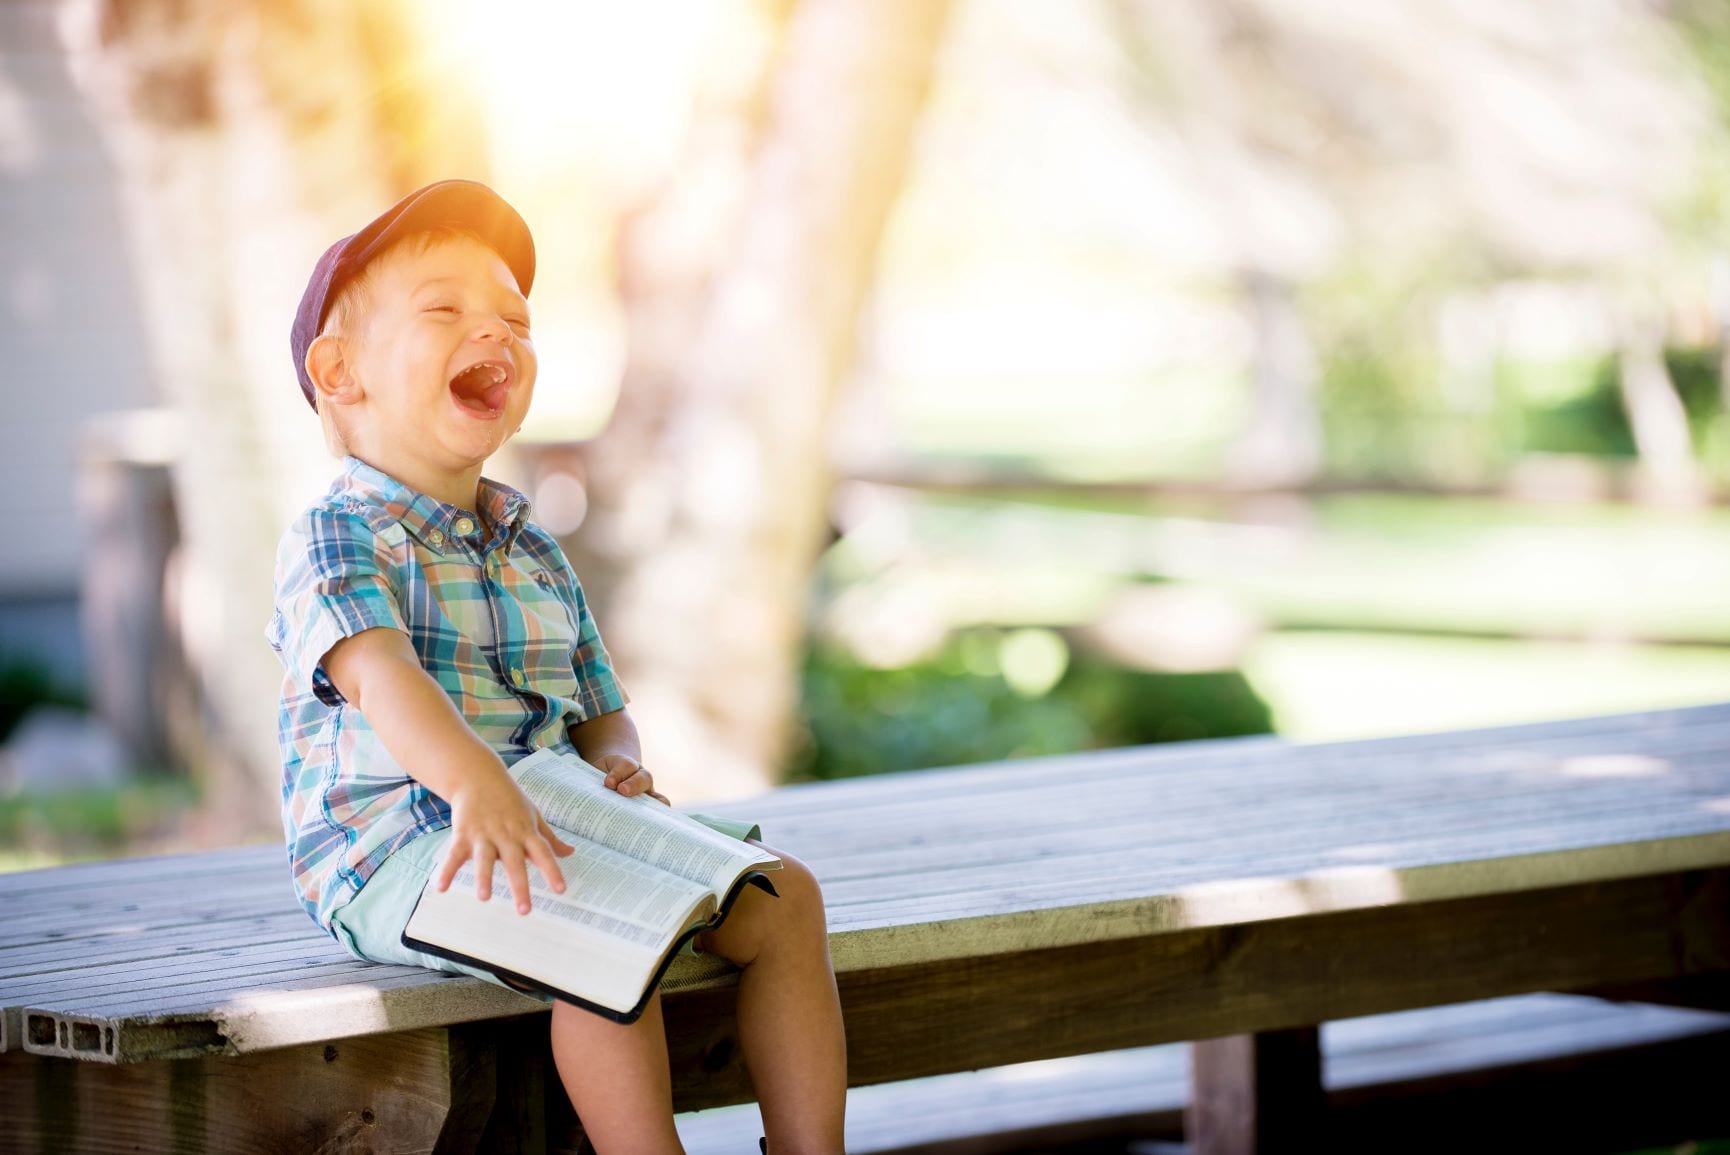 child wearing plaid shirt and hat sitting on bench outside holding books laughs